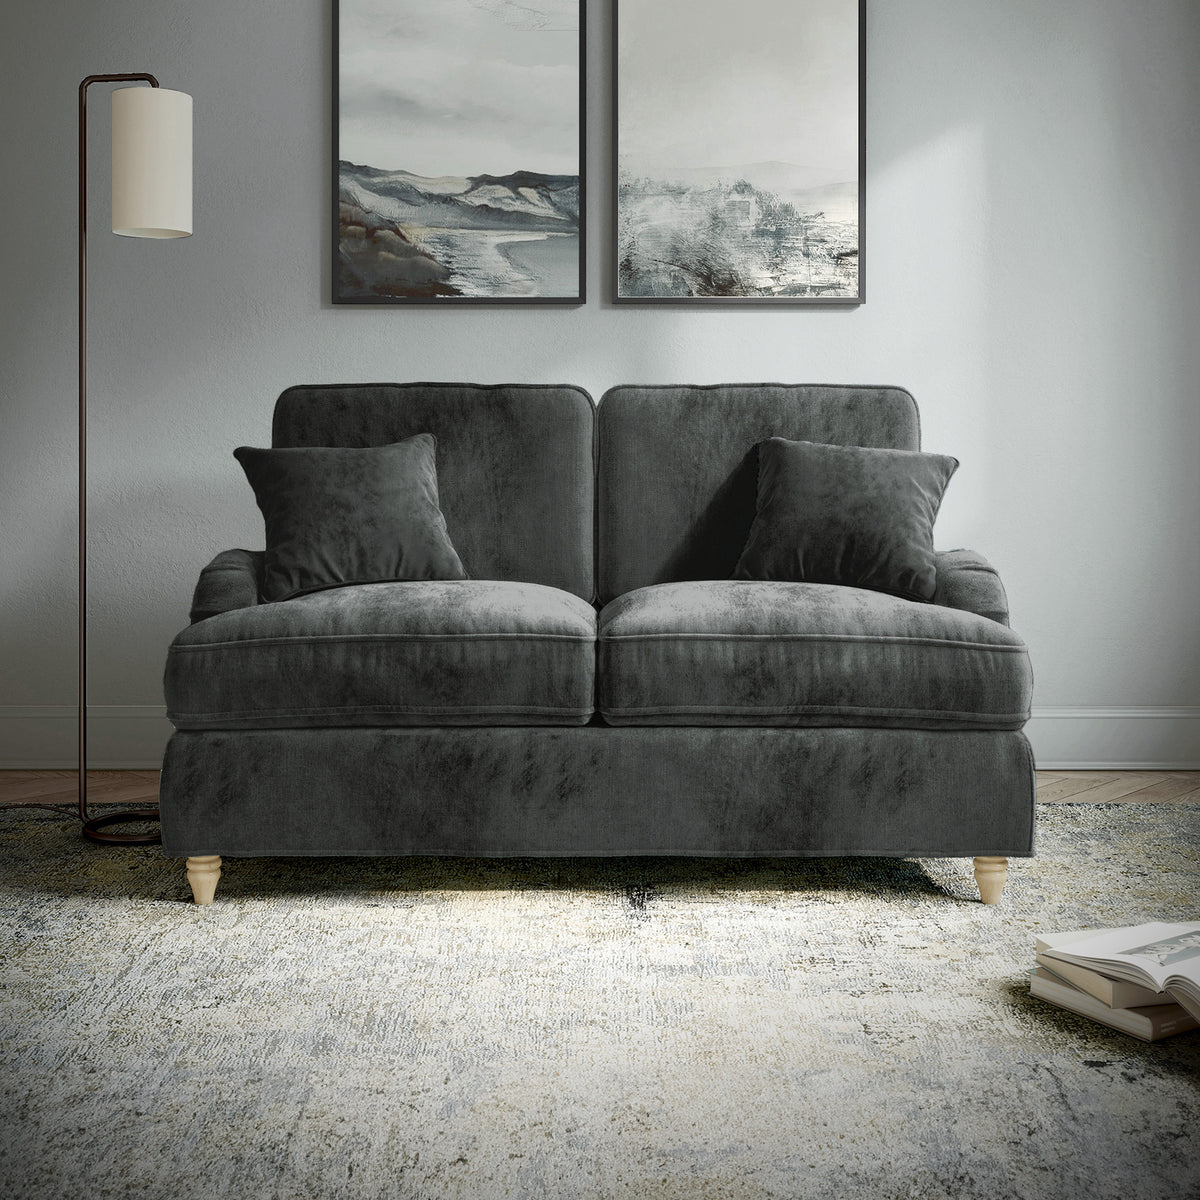 Arthur Charcoal Grey 2 Seater Sofa from Roseland Furniture